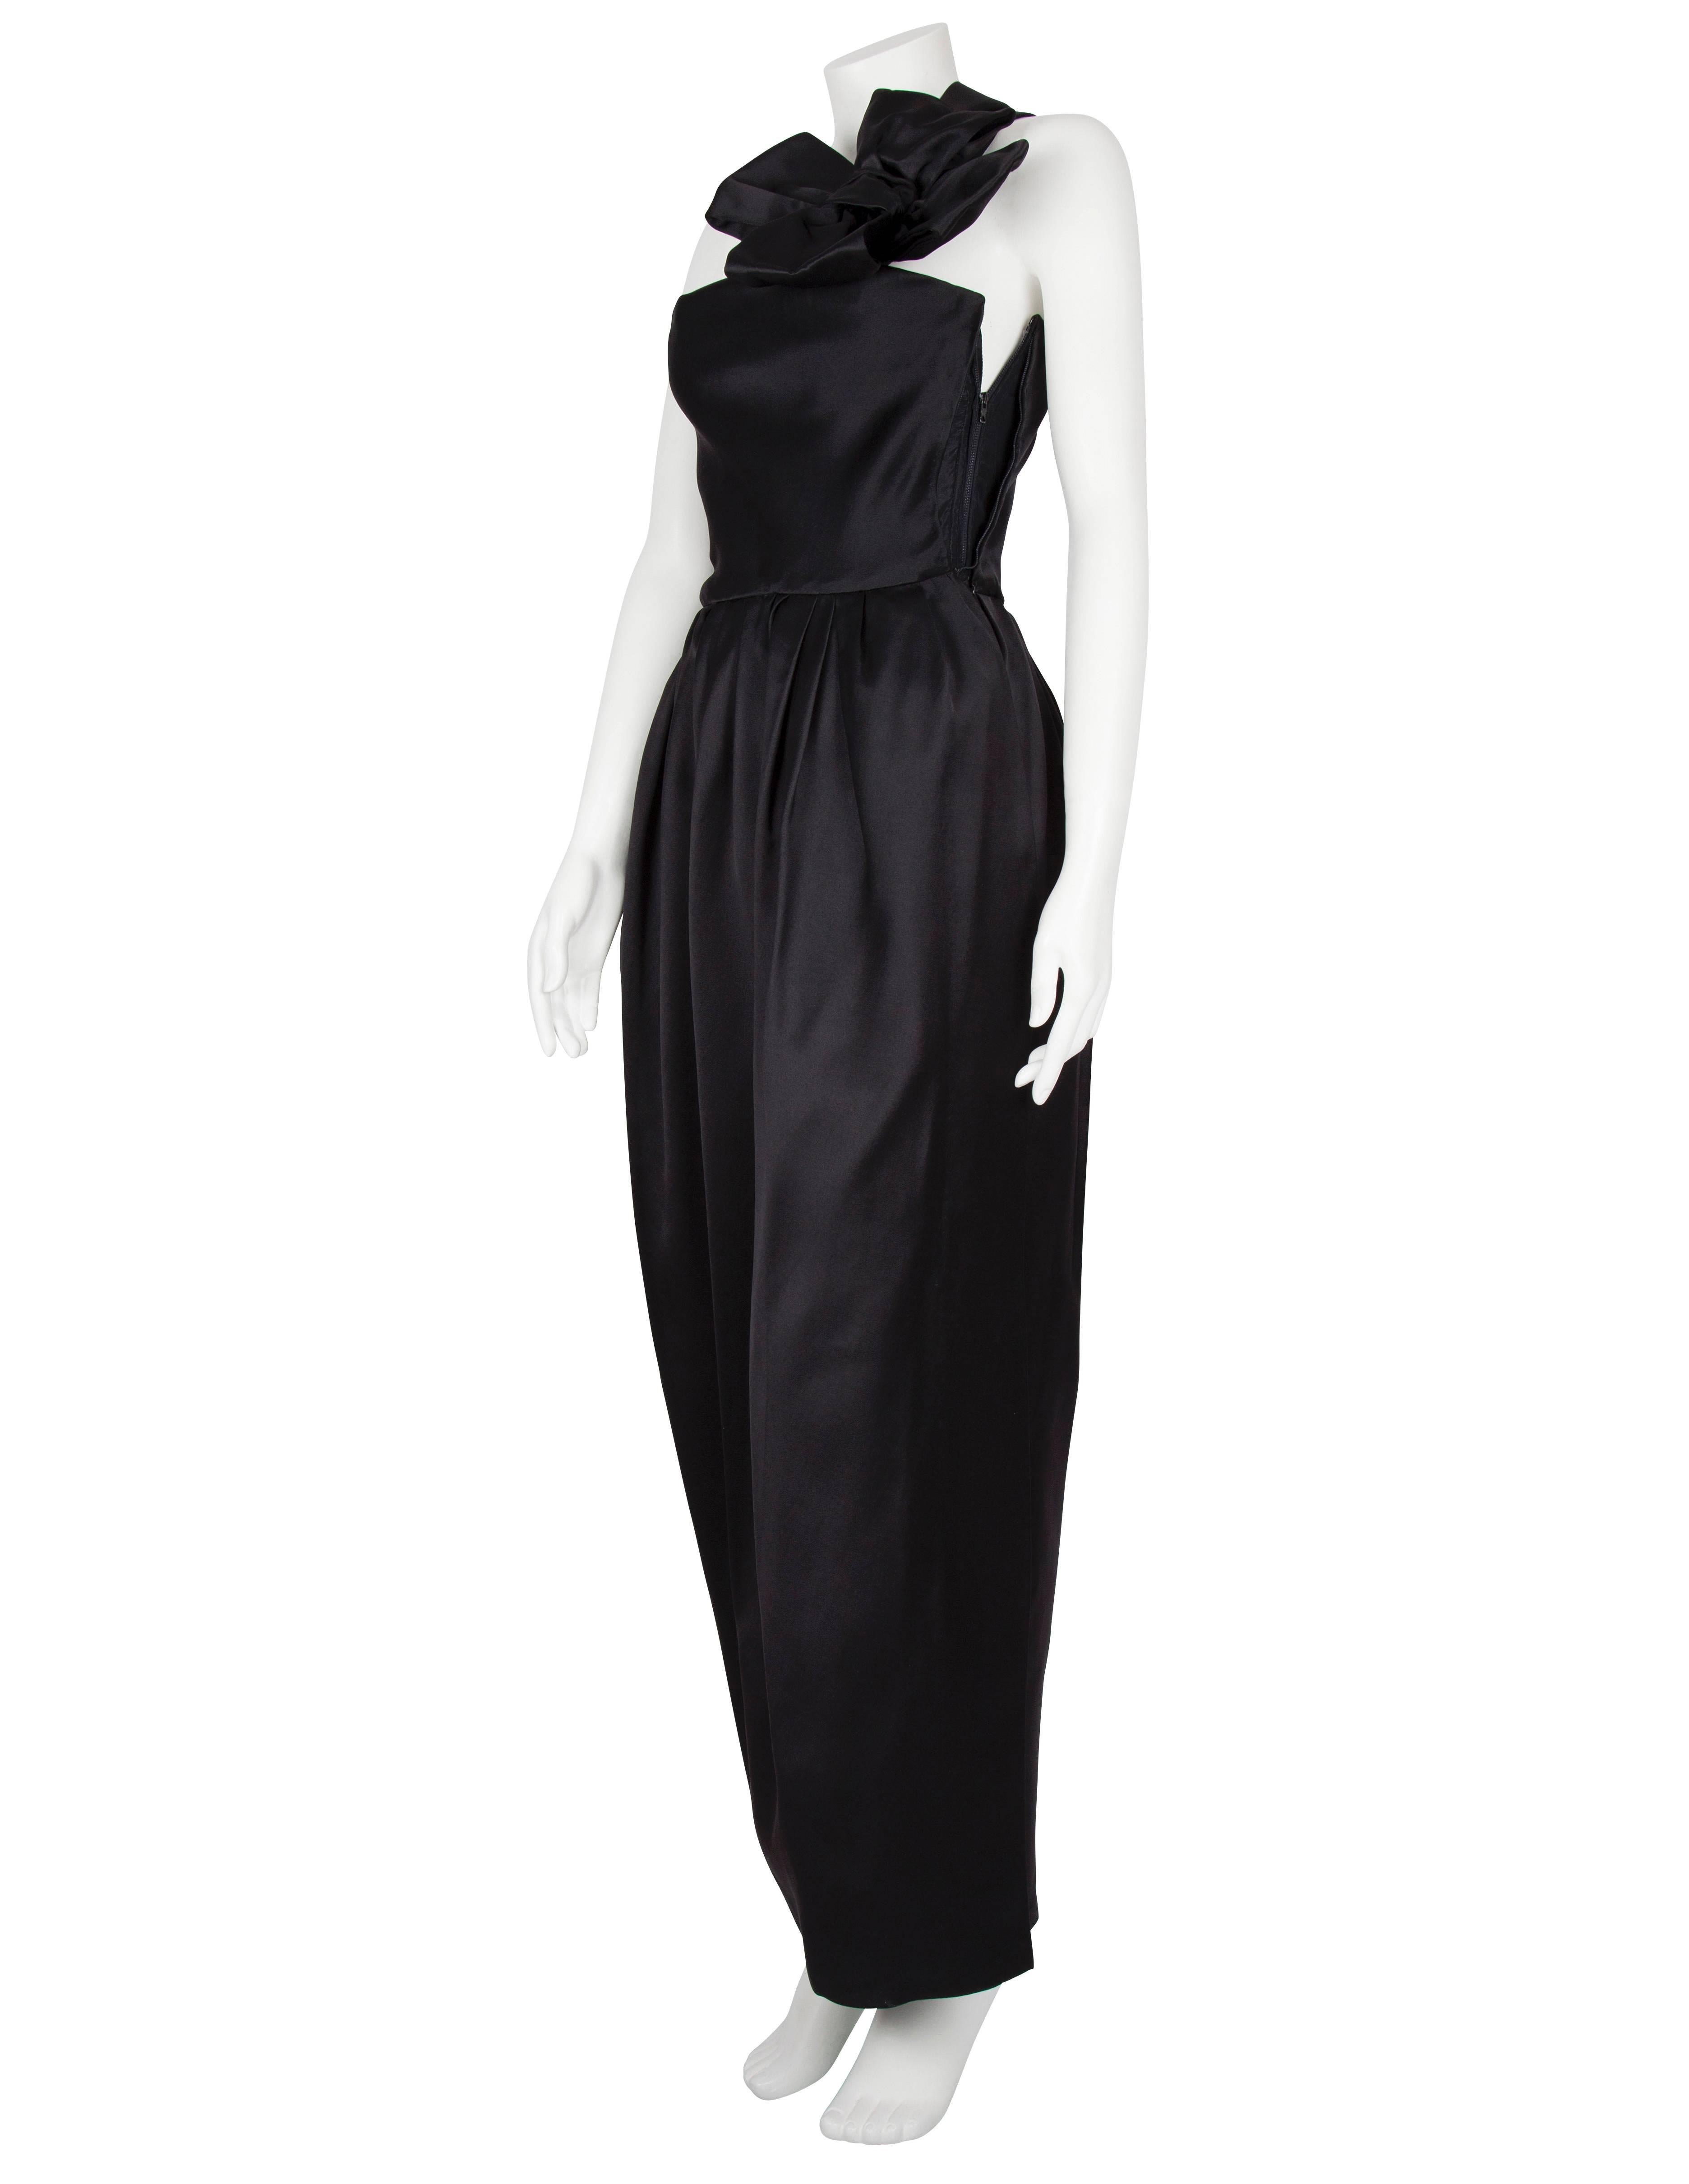 A/W 1979 Dior Couture Silk Satin One Shoulder & Dramatic Bow Tulip Skirt Gown  In Excellent Condition For Sale In London, GB